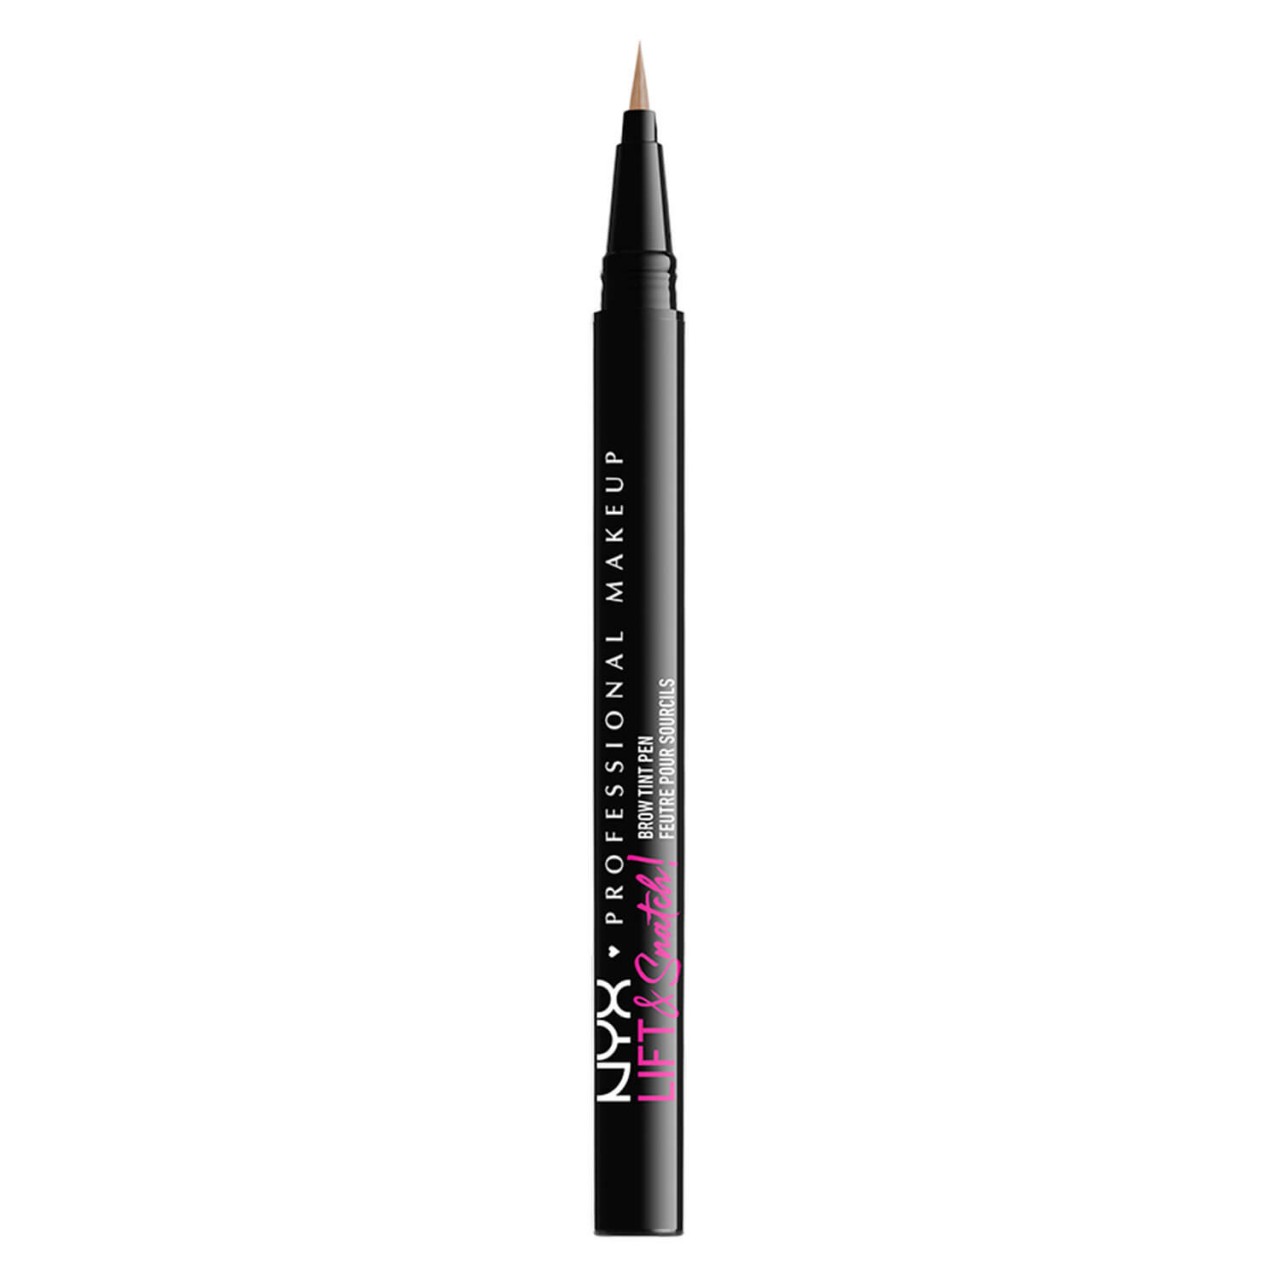 NYX Brows - Lift & Snatch! Brow Tint Pen Blonde 01 von NYX Professional Makeup